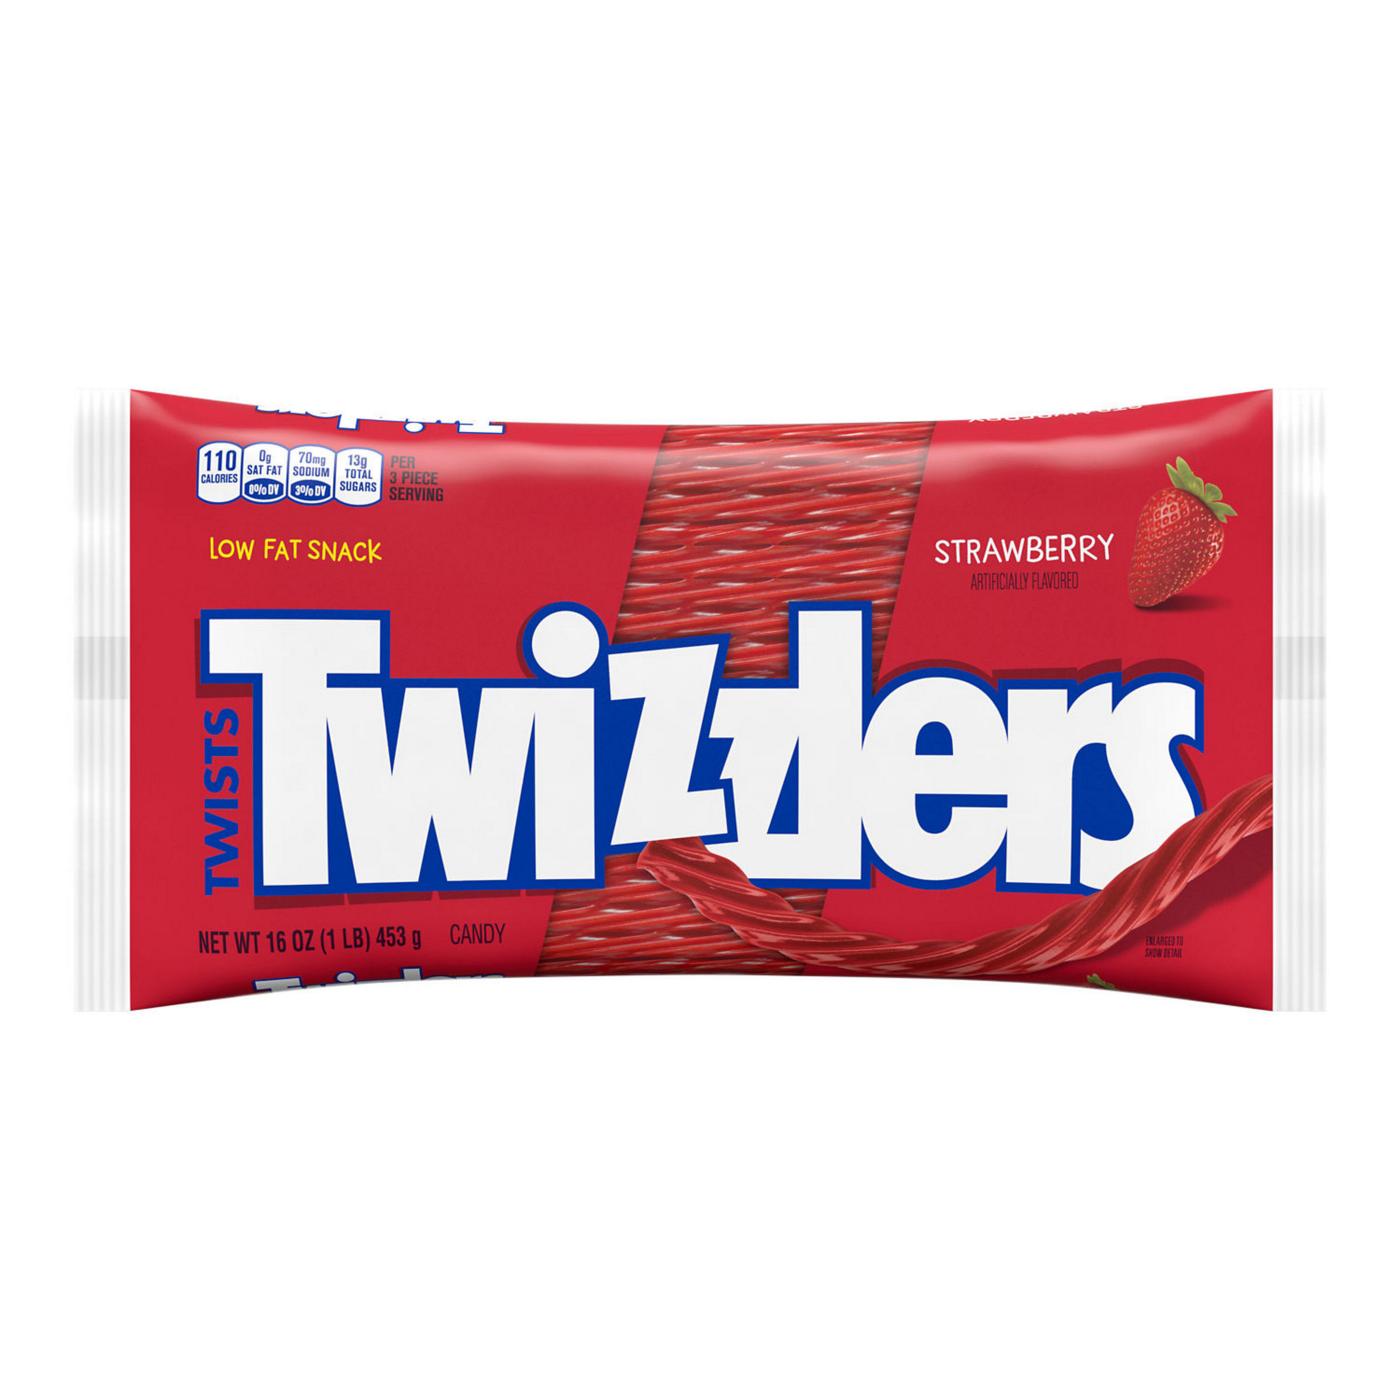 Twizzlers Twists Strawberry Flavored Chewy Candy; image 1 of 6